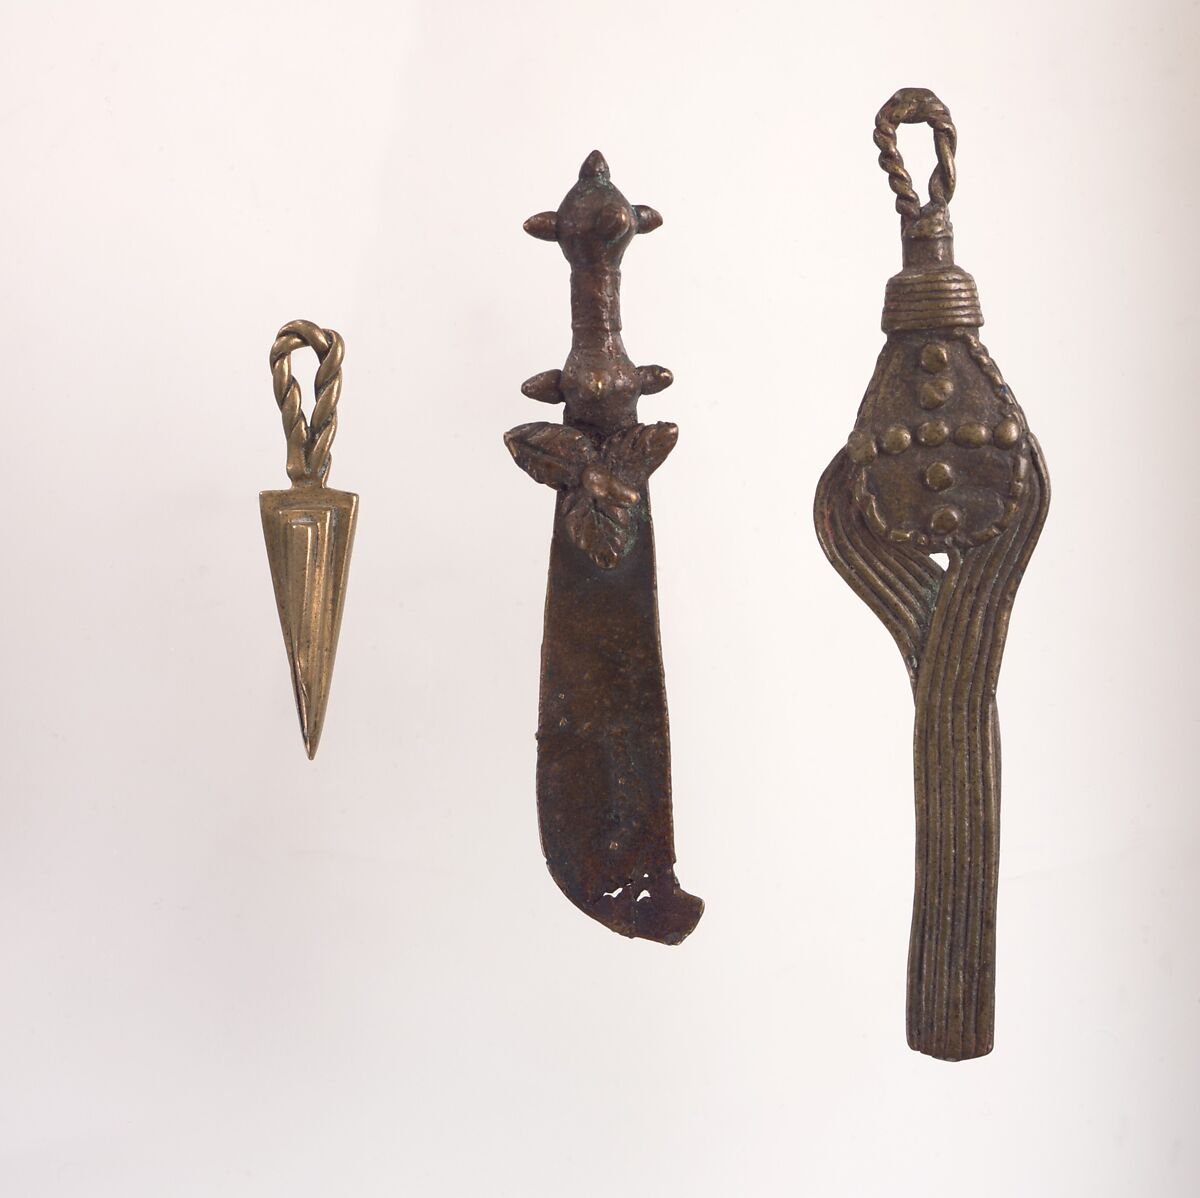 Three Gold Weights: Sword, Fly Whisk, Amulet, Brass, Akan peoples 